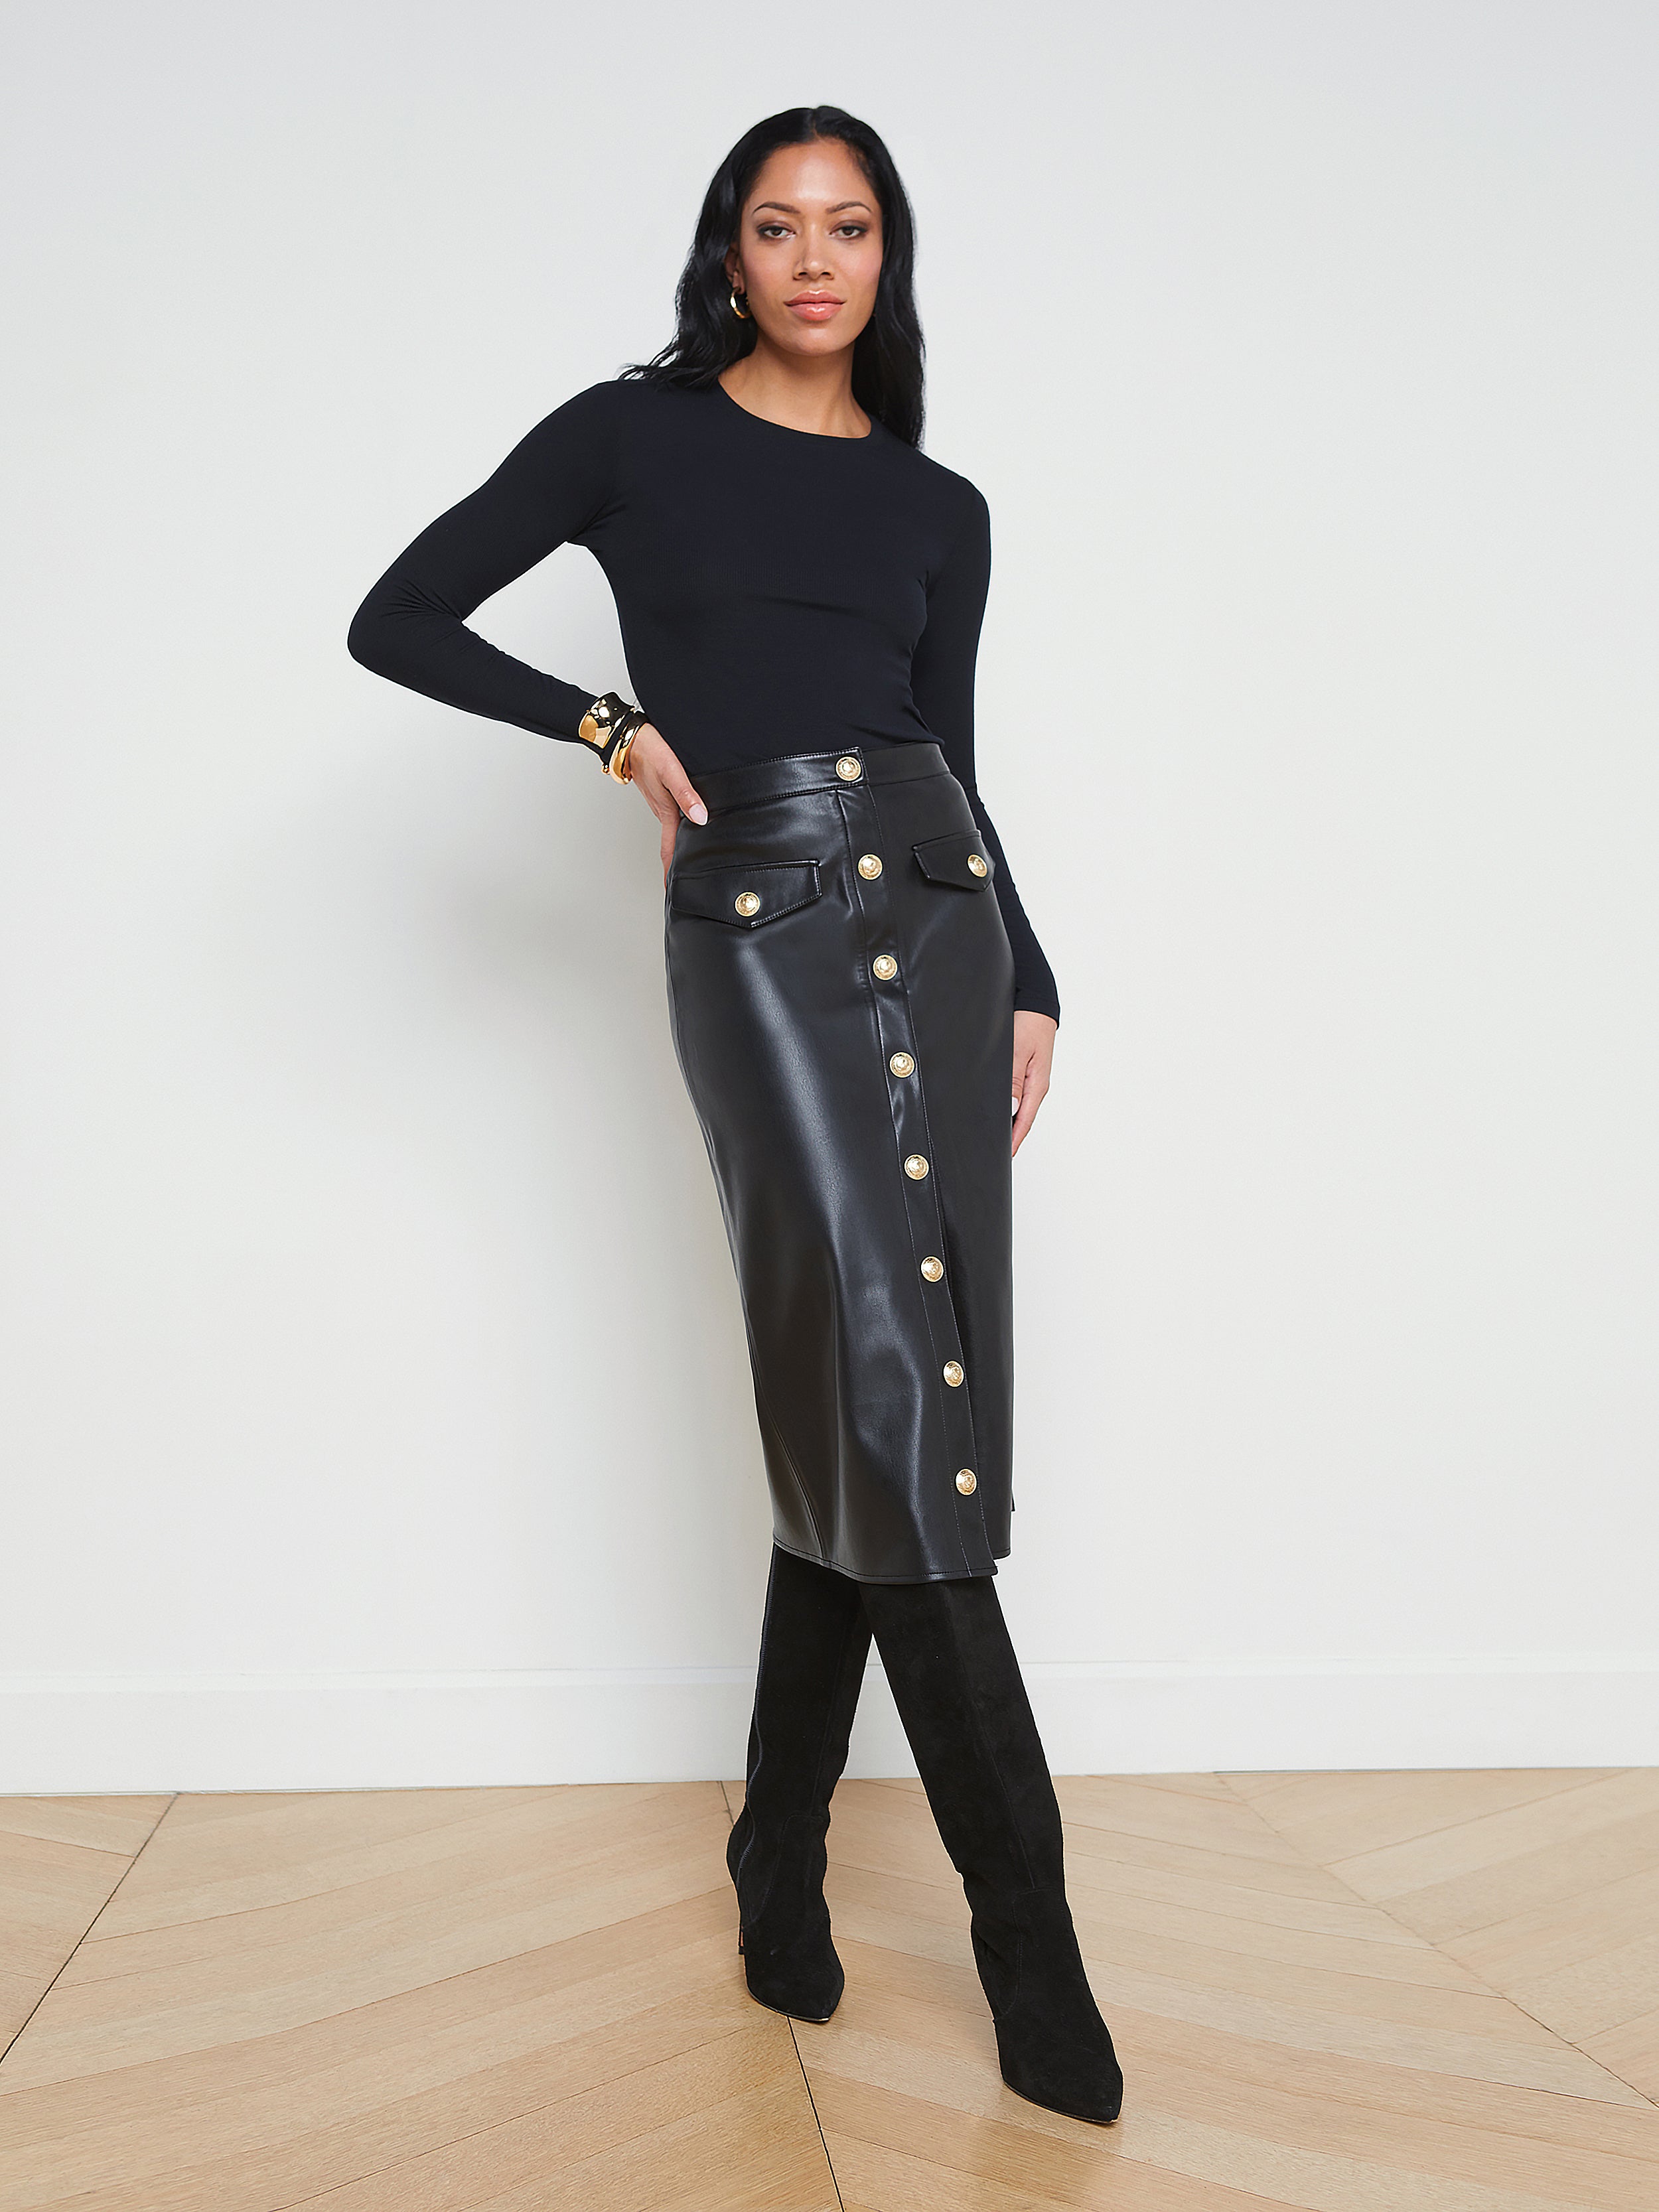 Milann Faux Leather Button Midi Skirt in Black - L'AGENCE